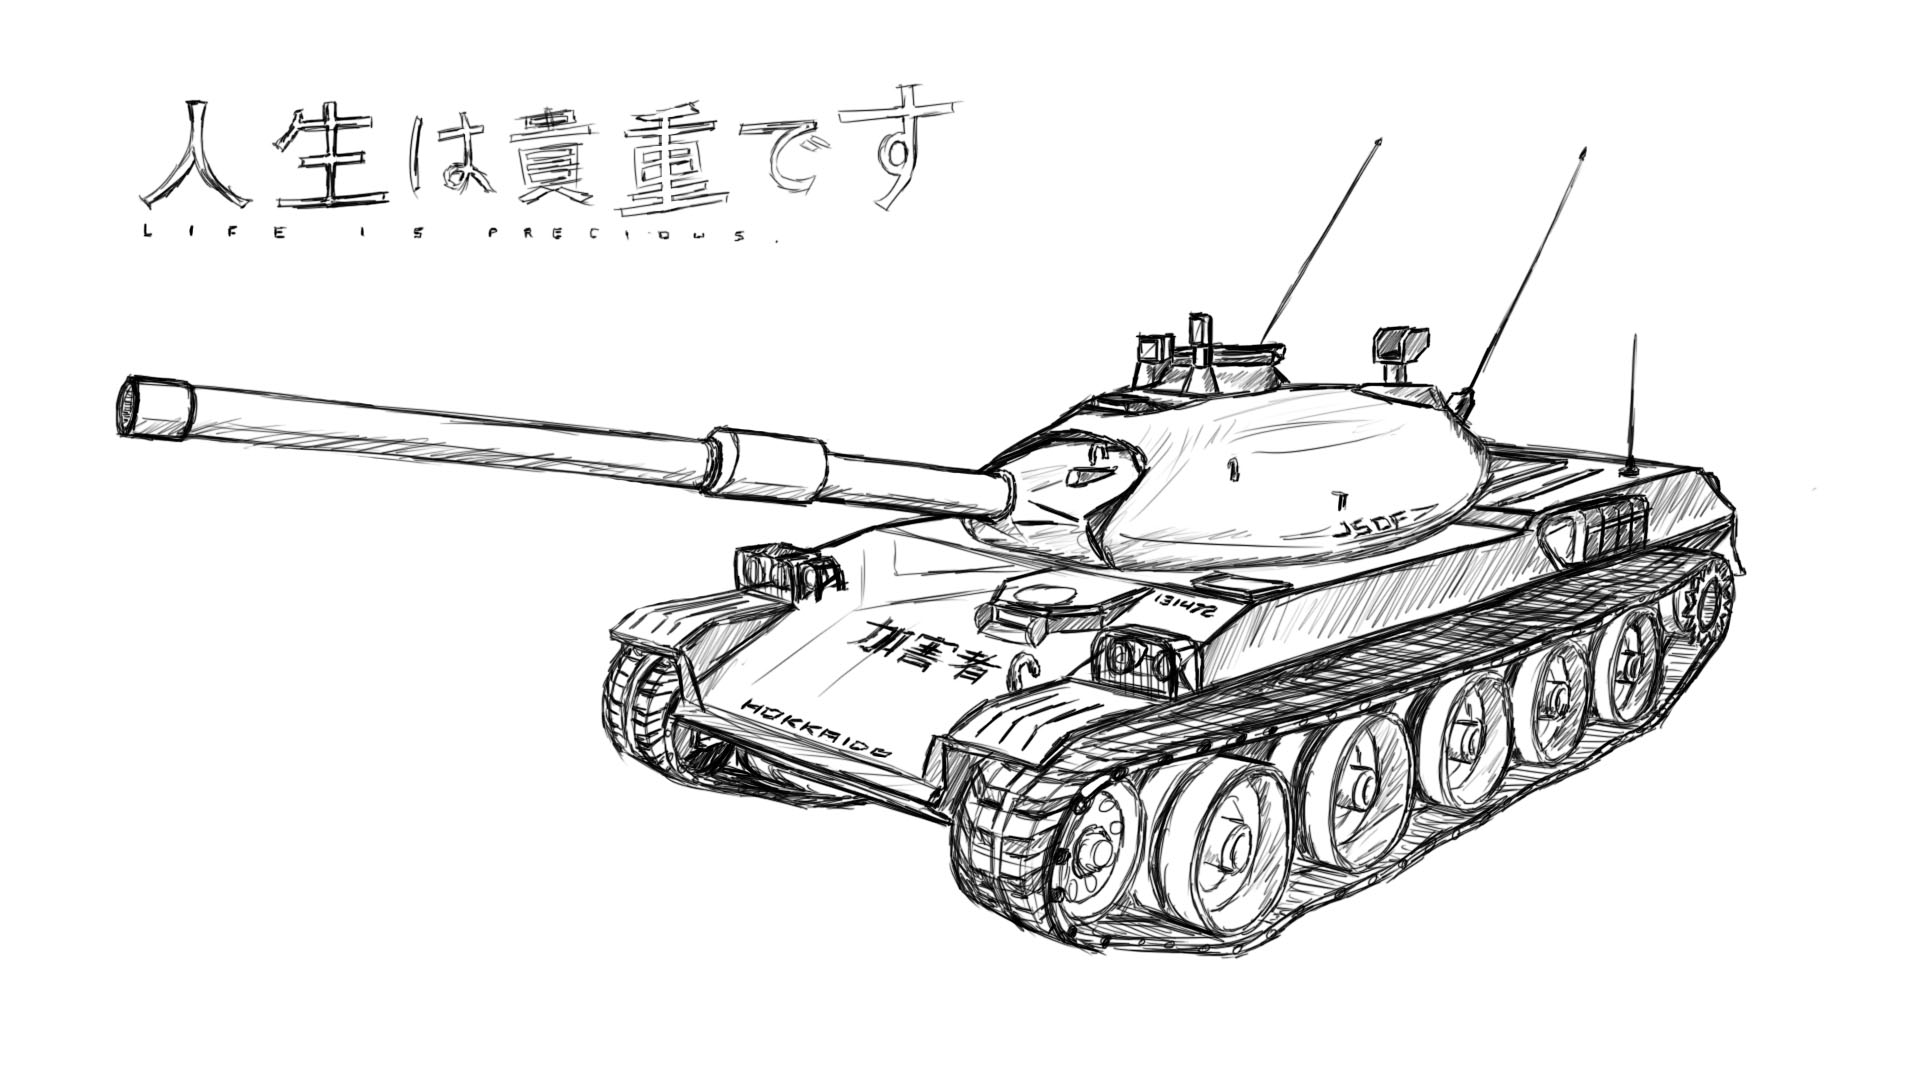 how to draw a military man how to draw a military tank